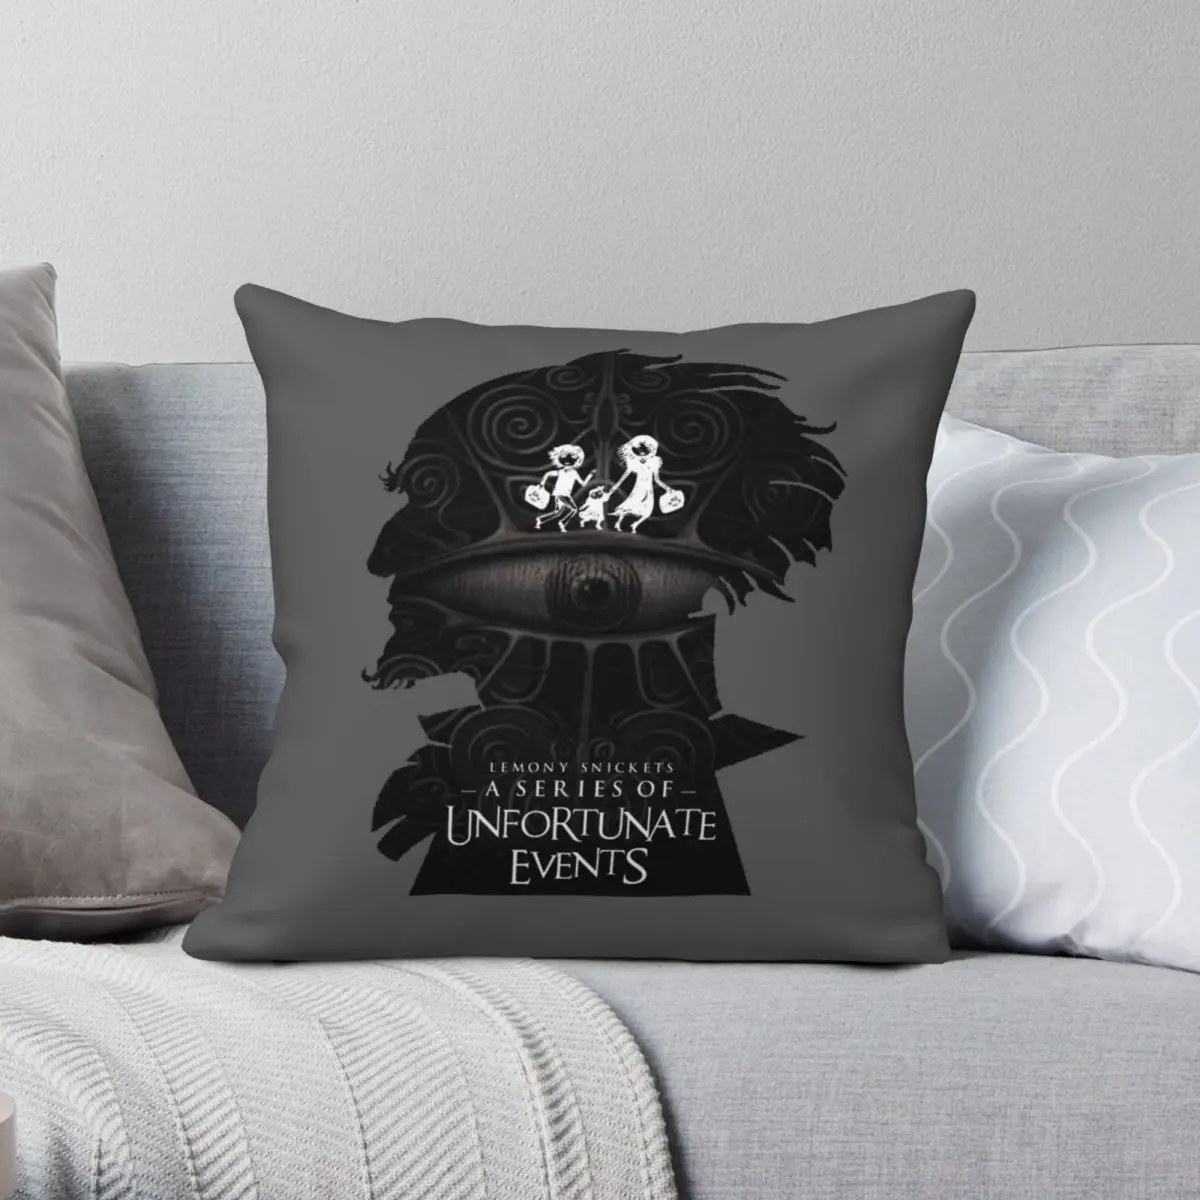 A Series Of Unfortunate Events Square Pillowcase Polyester Linen Velvet Pattern Zip Decor Throw Pillow Case Room Cushion Case 18